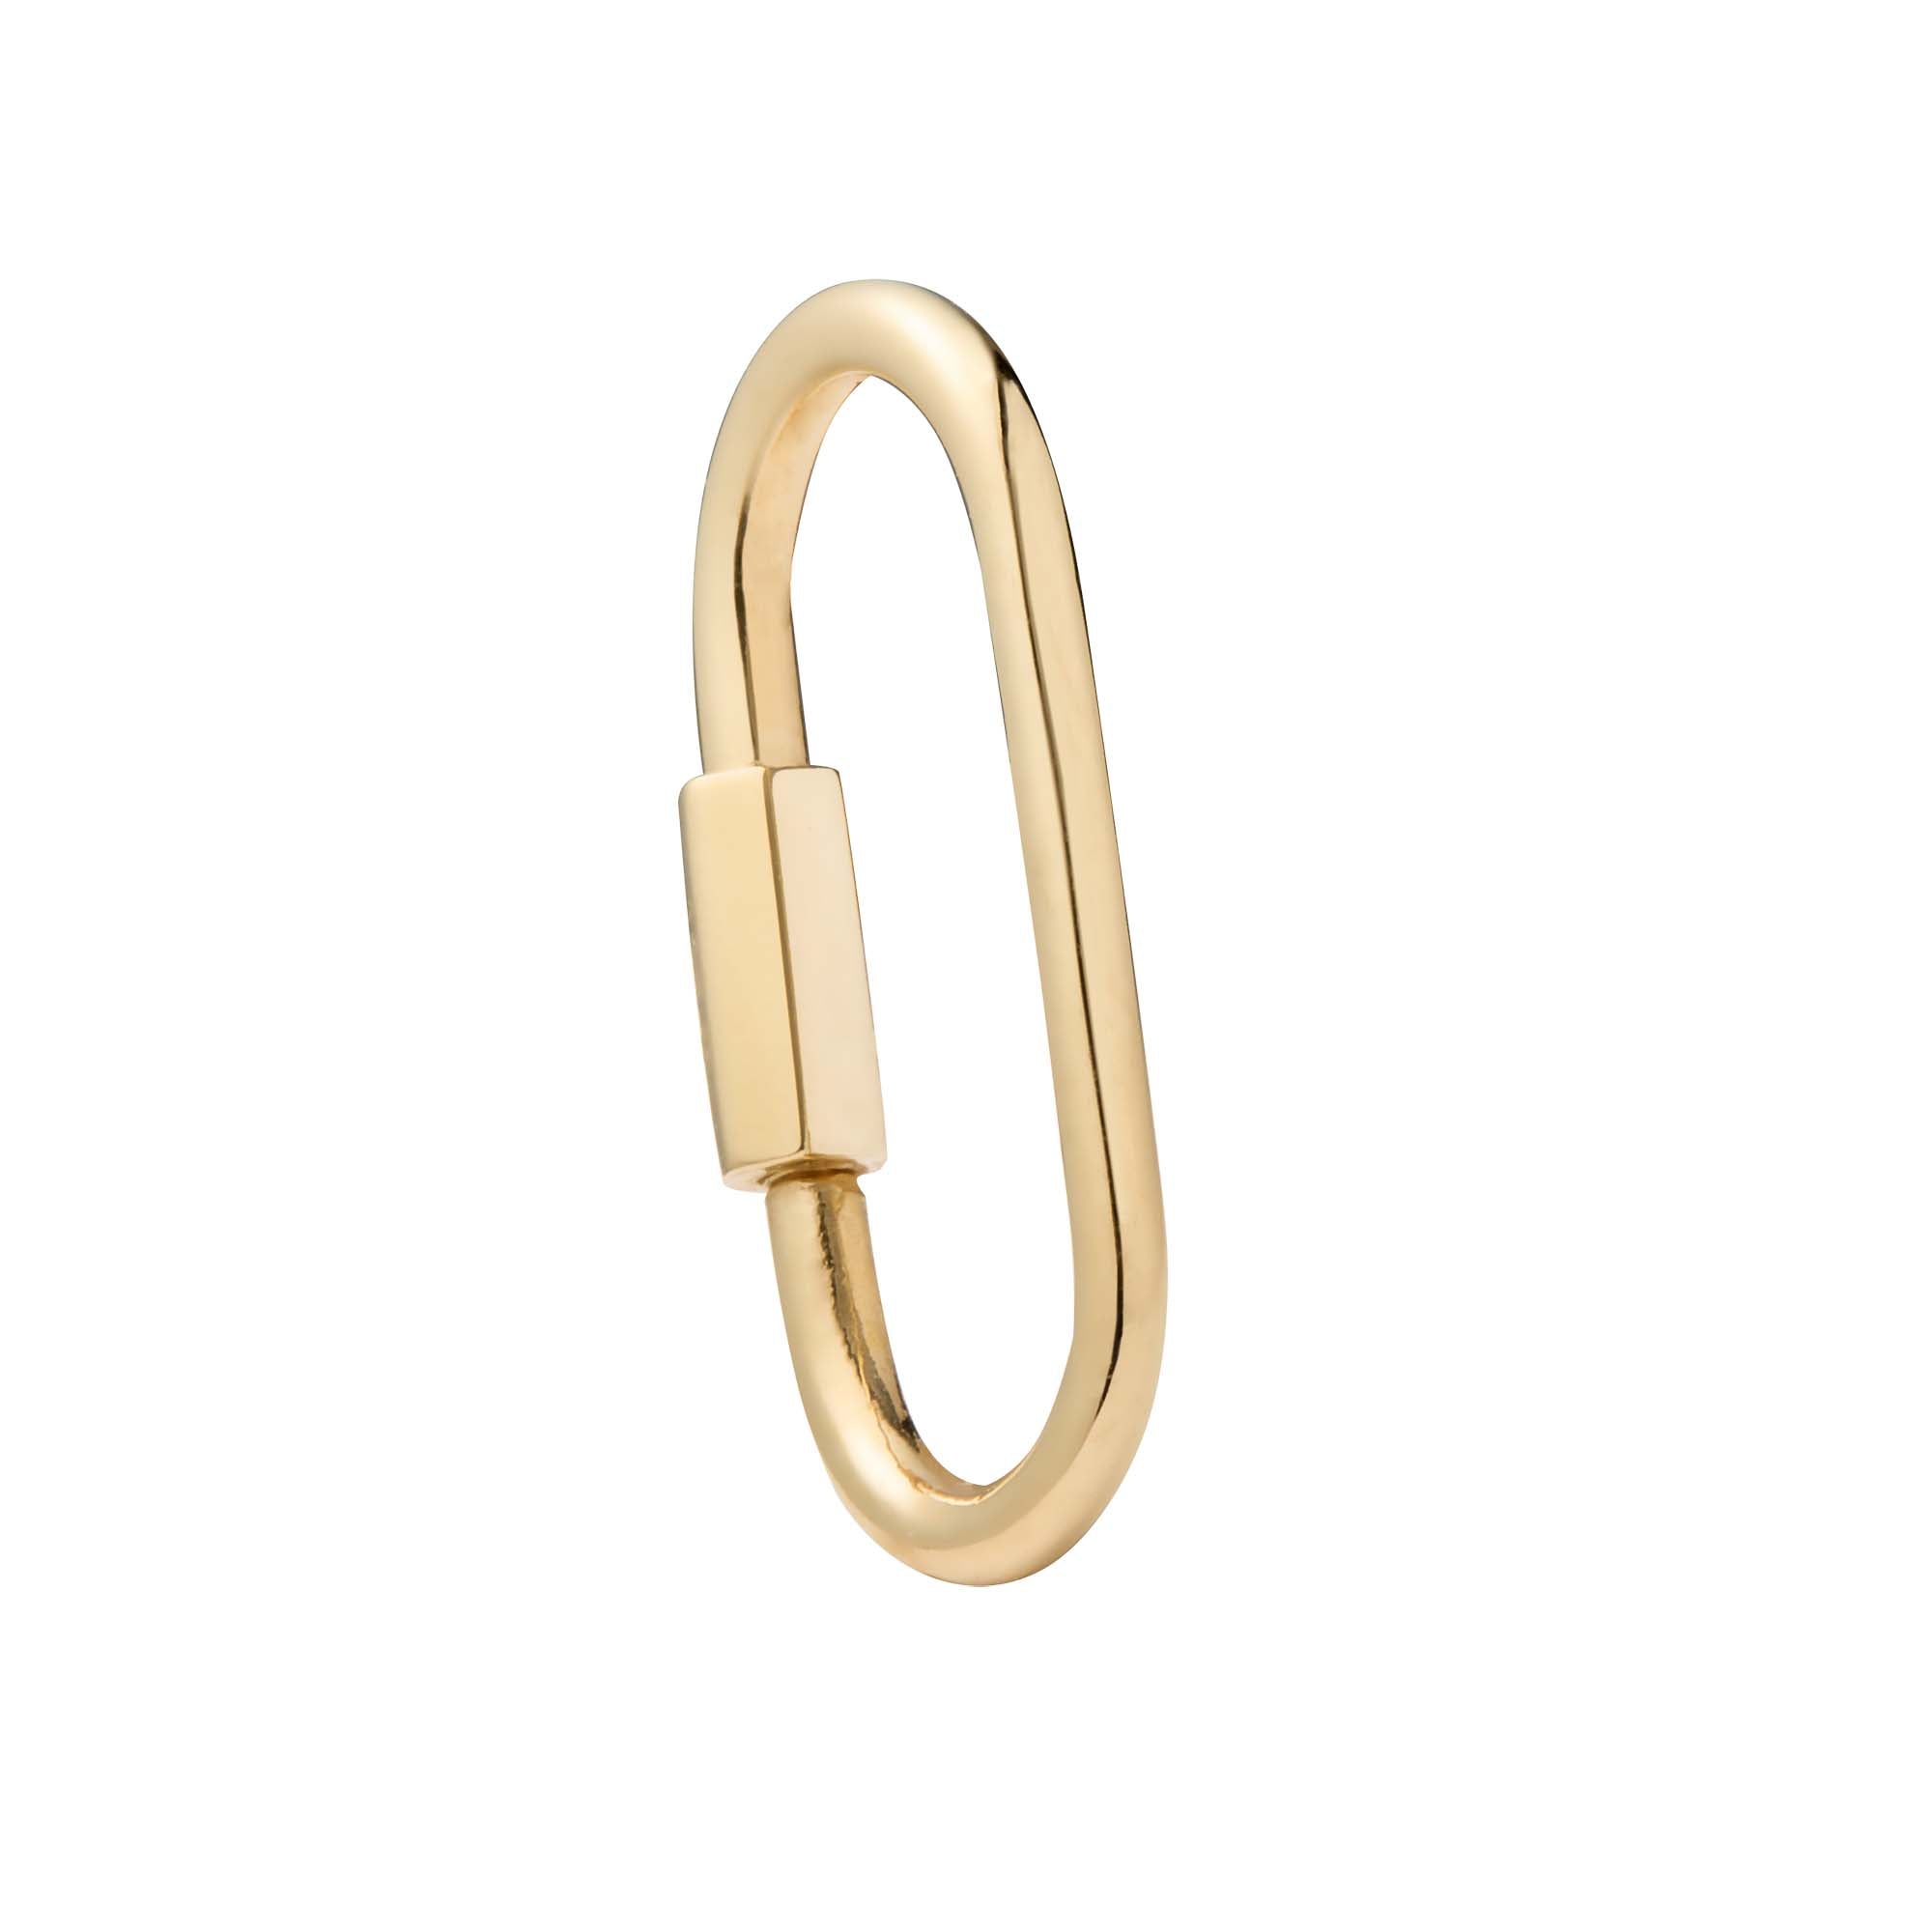 Oblong Baby Lock with Screw Closure